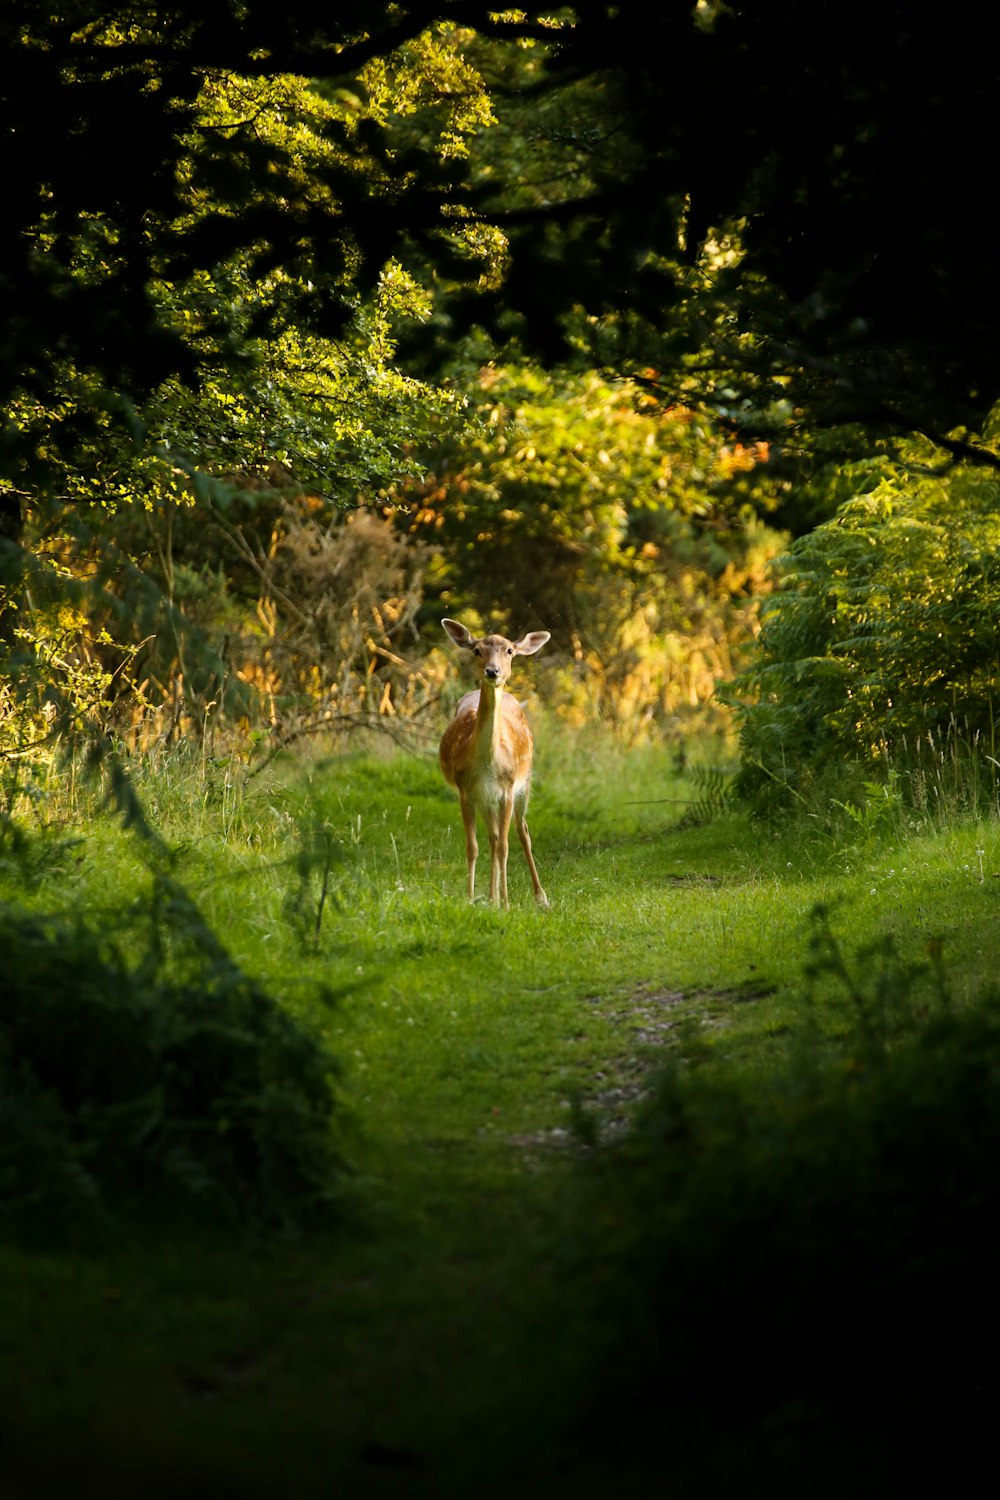 brown deer standing of grass field surrounded by trees